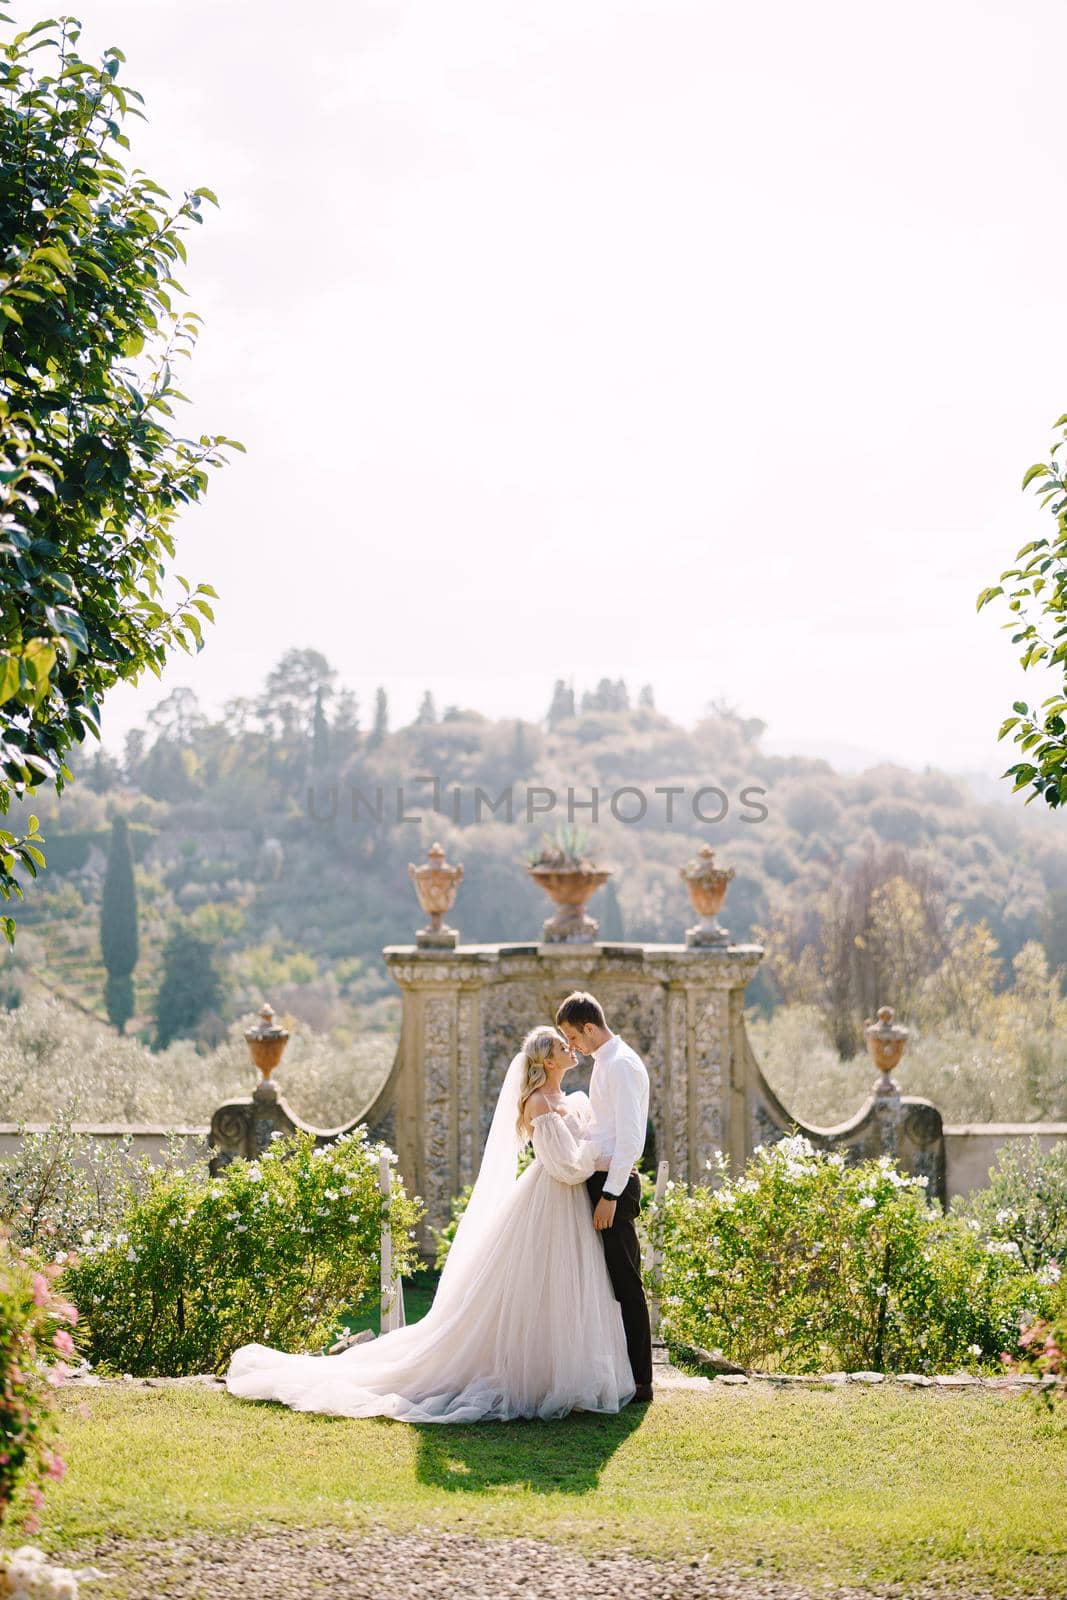 The bride and groom walk in the park. Wedding at an old winery villa in Tuscany, Italy. Round wedding arch decorated with white flowers and greenery in front of an ancient Italian architecture. by Nadtochiy